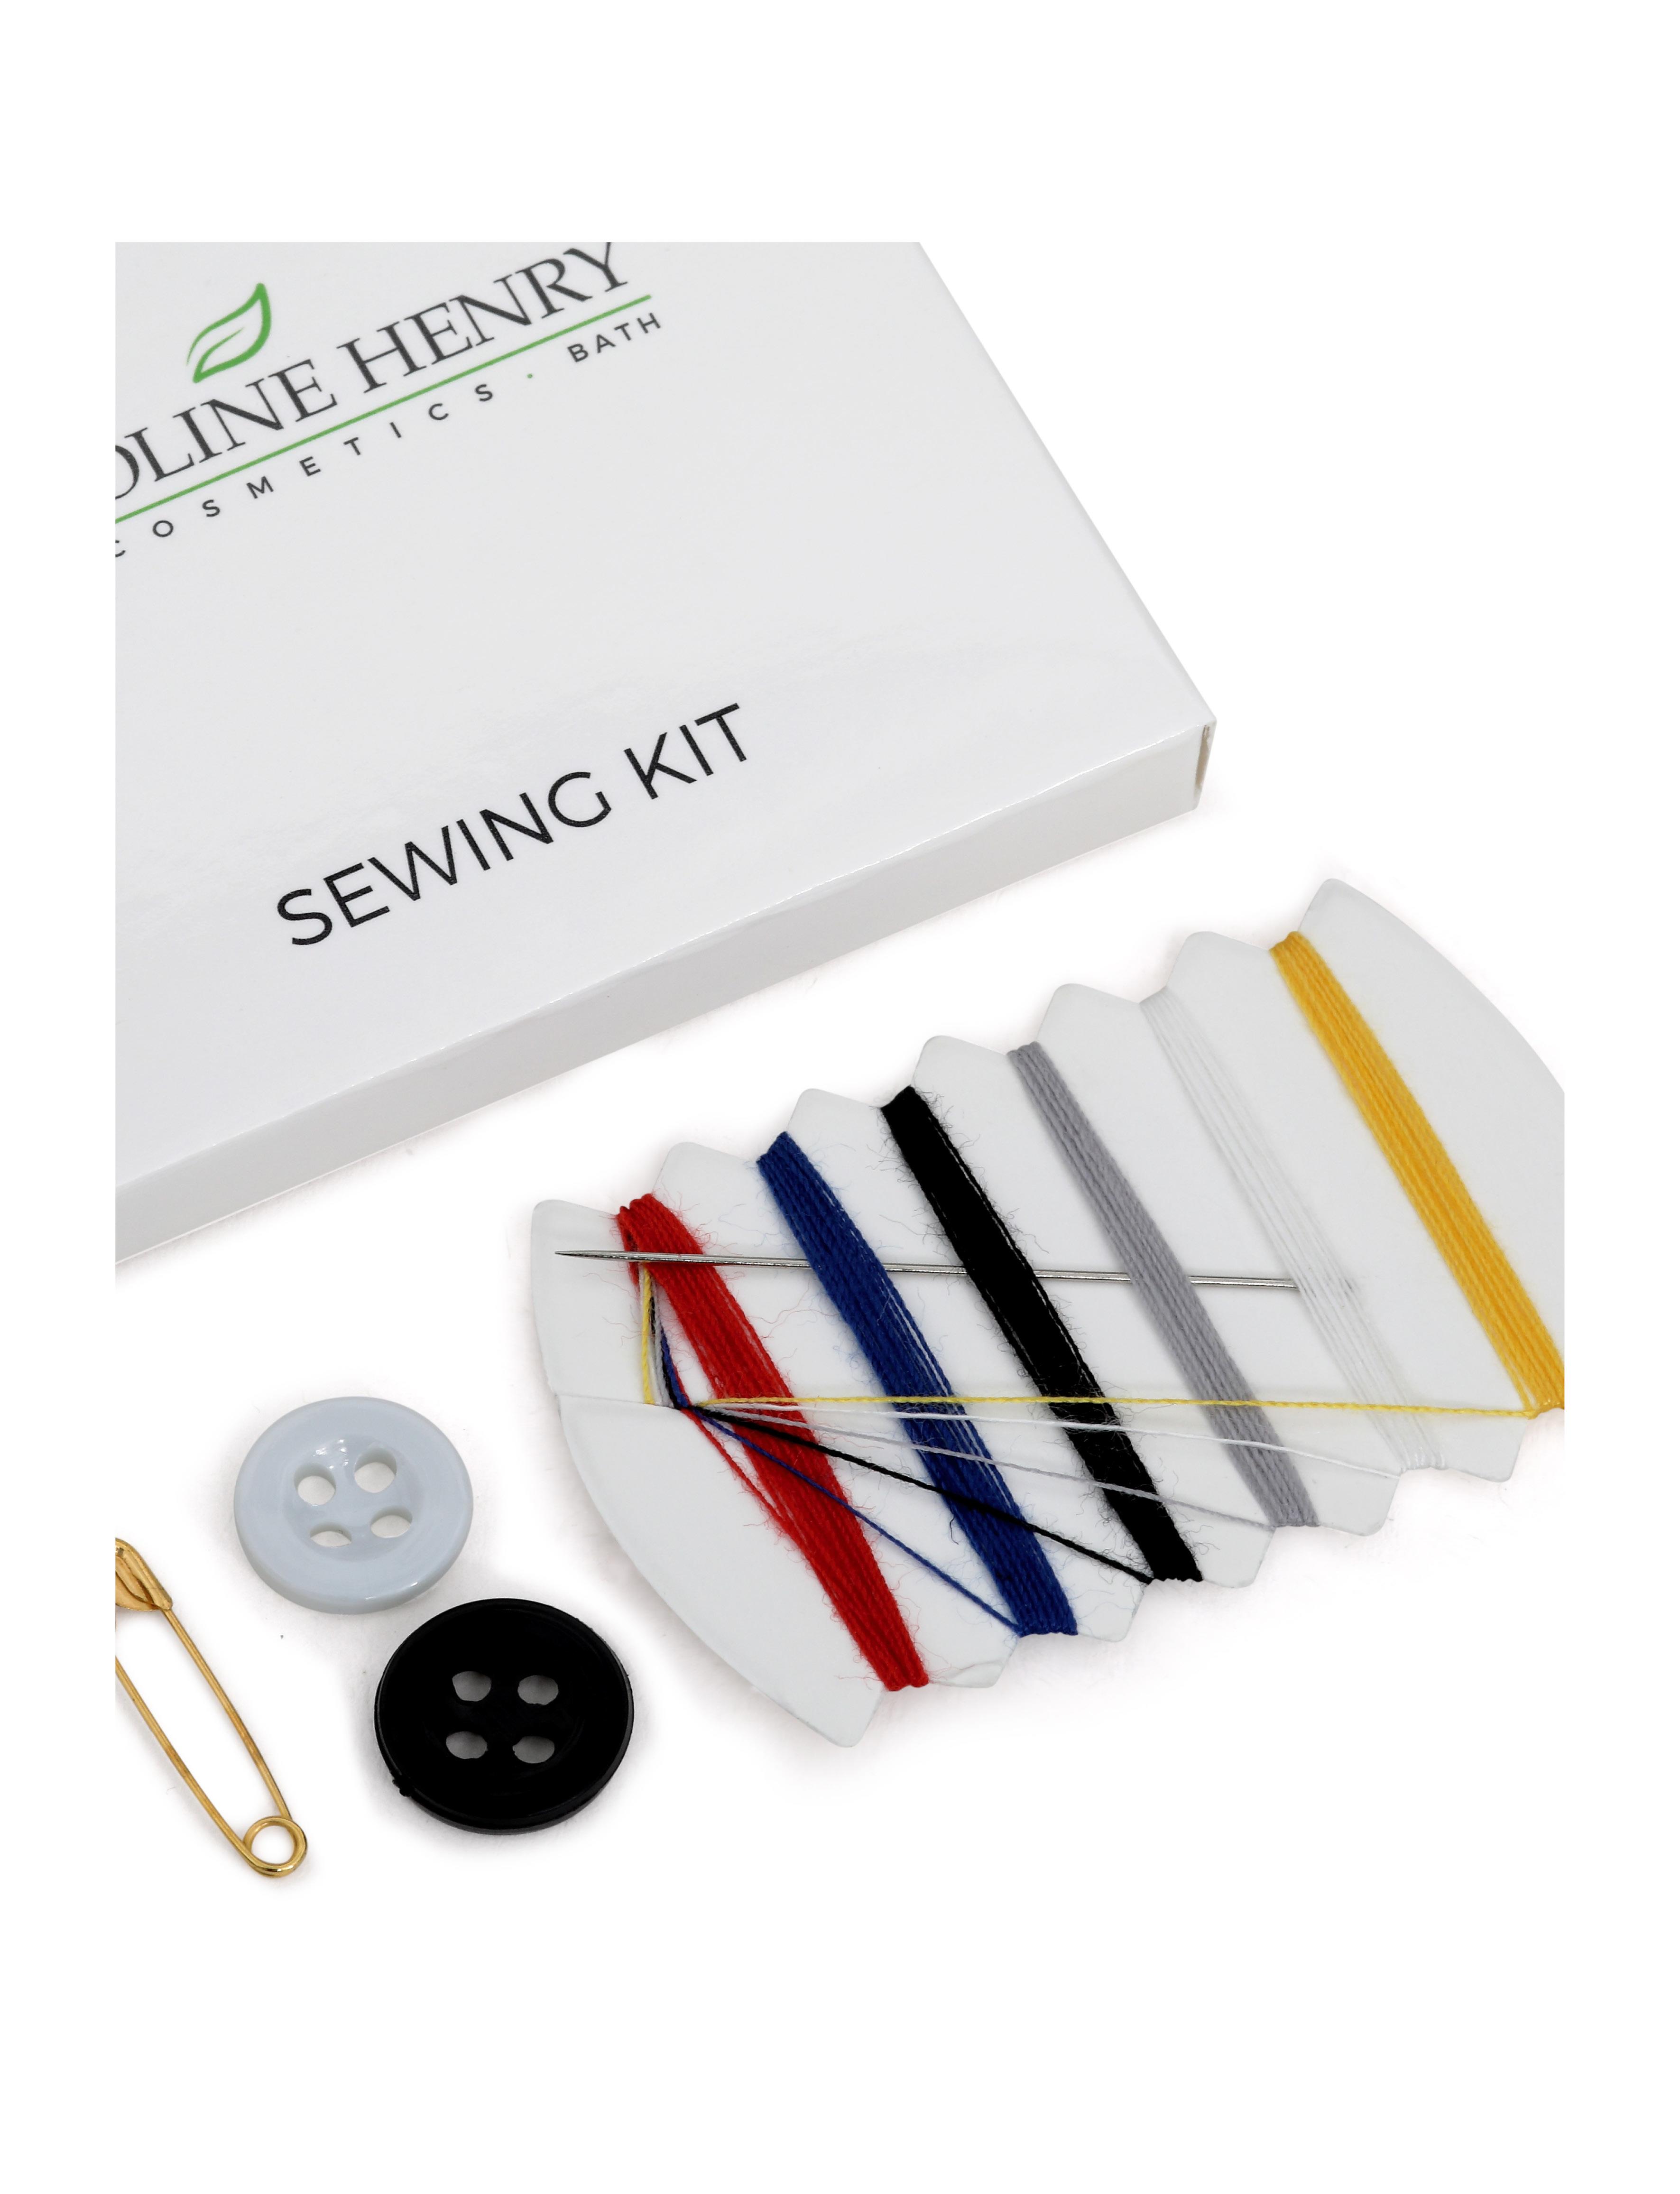 caroline henry hotel sewing kit in a gloss white box